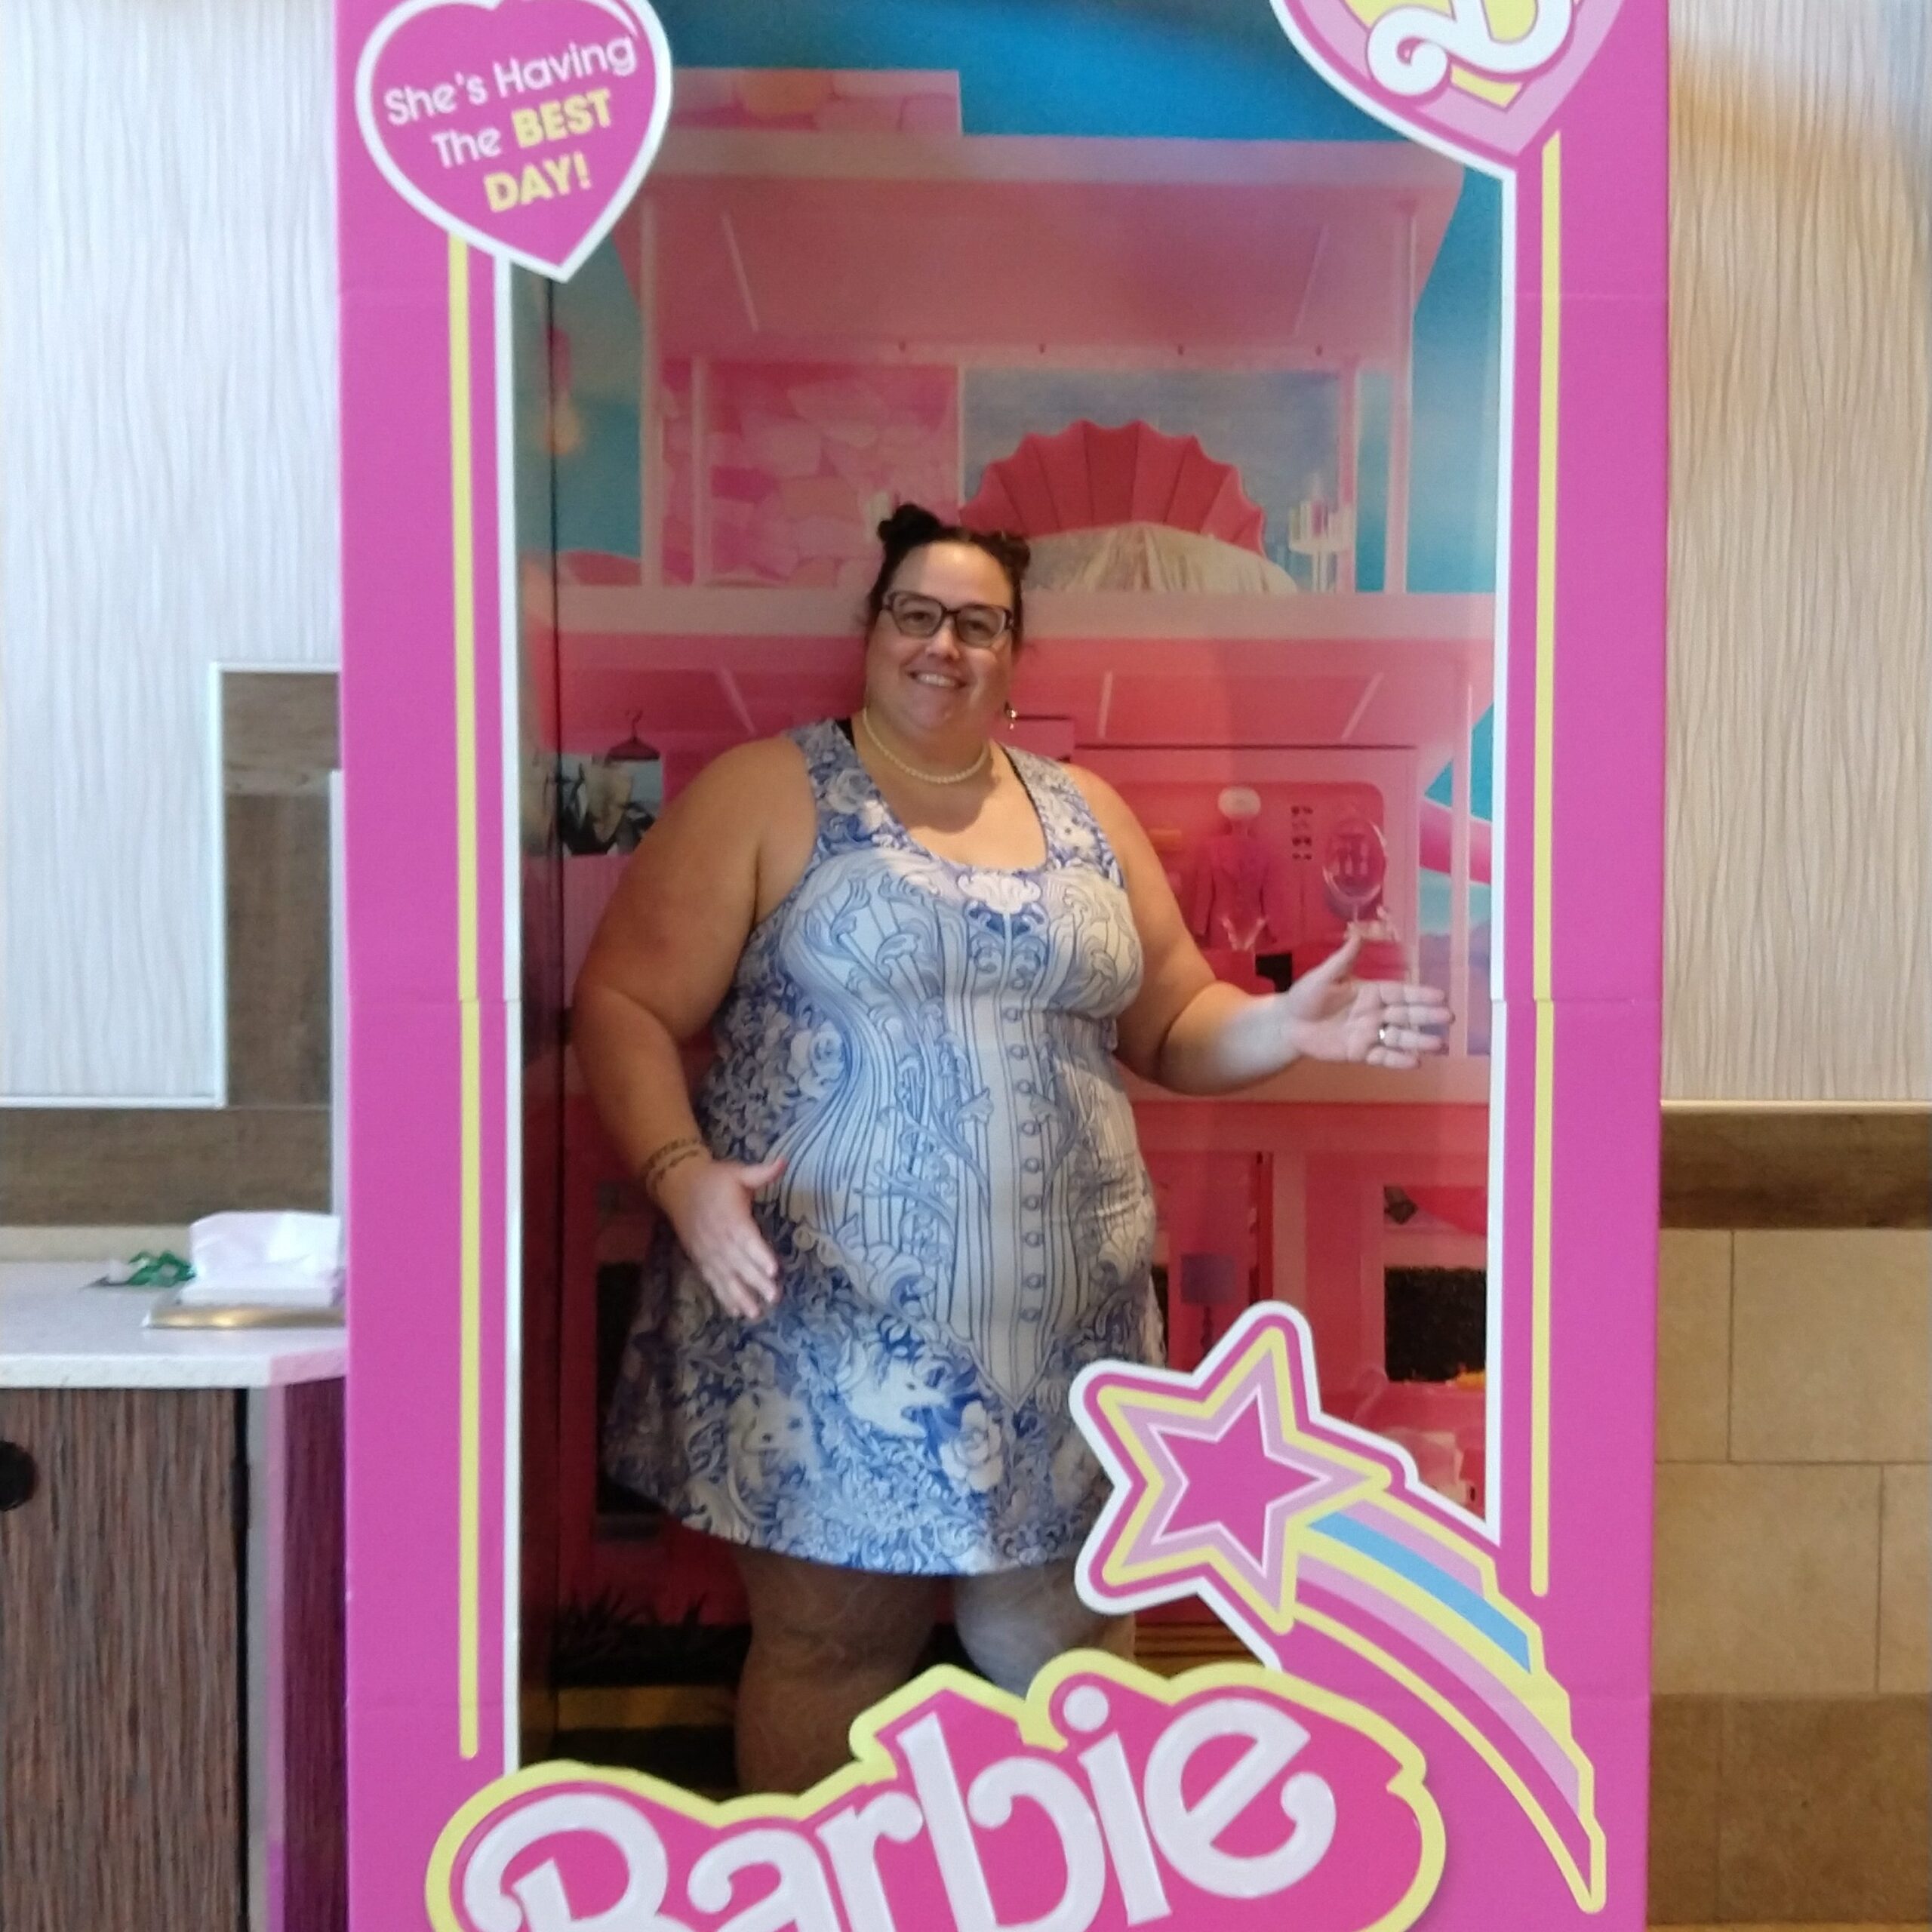 me, dressed up and posing in the Barbie doll box at the movie theater